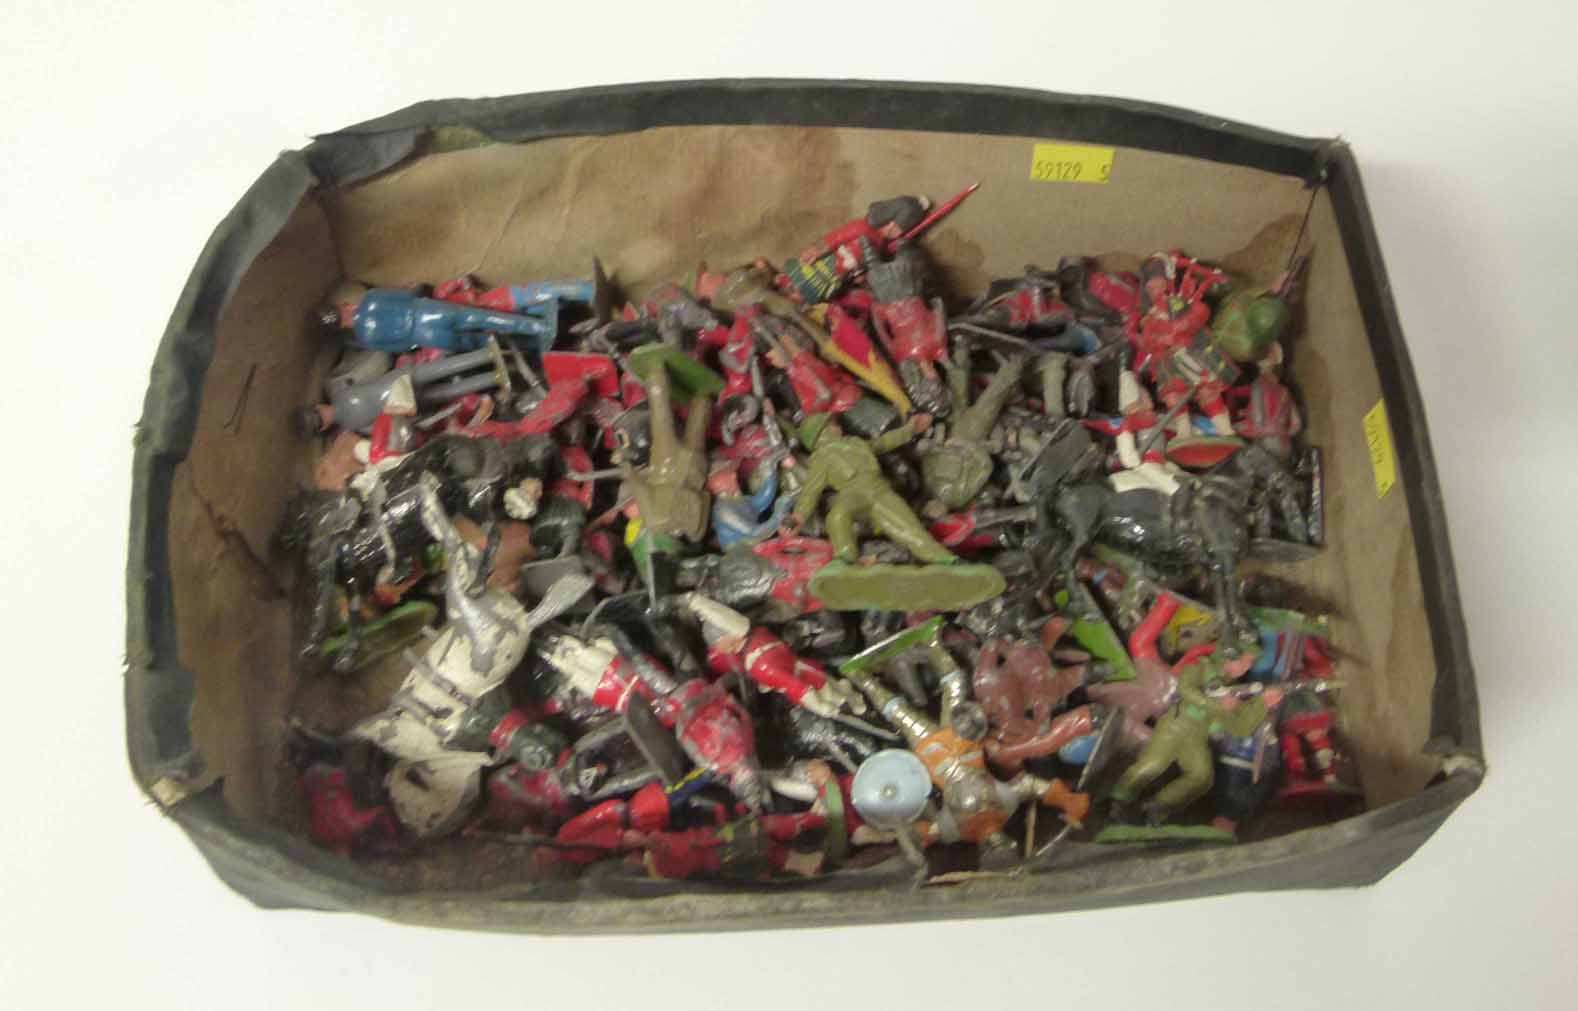 A collection of lead and metal toy soldiers and horses Unfortunately we are not doing condition